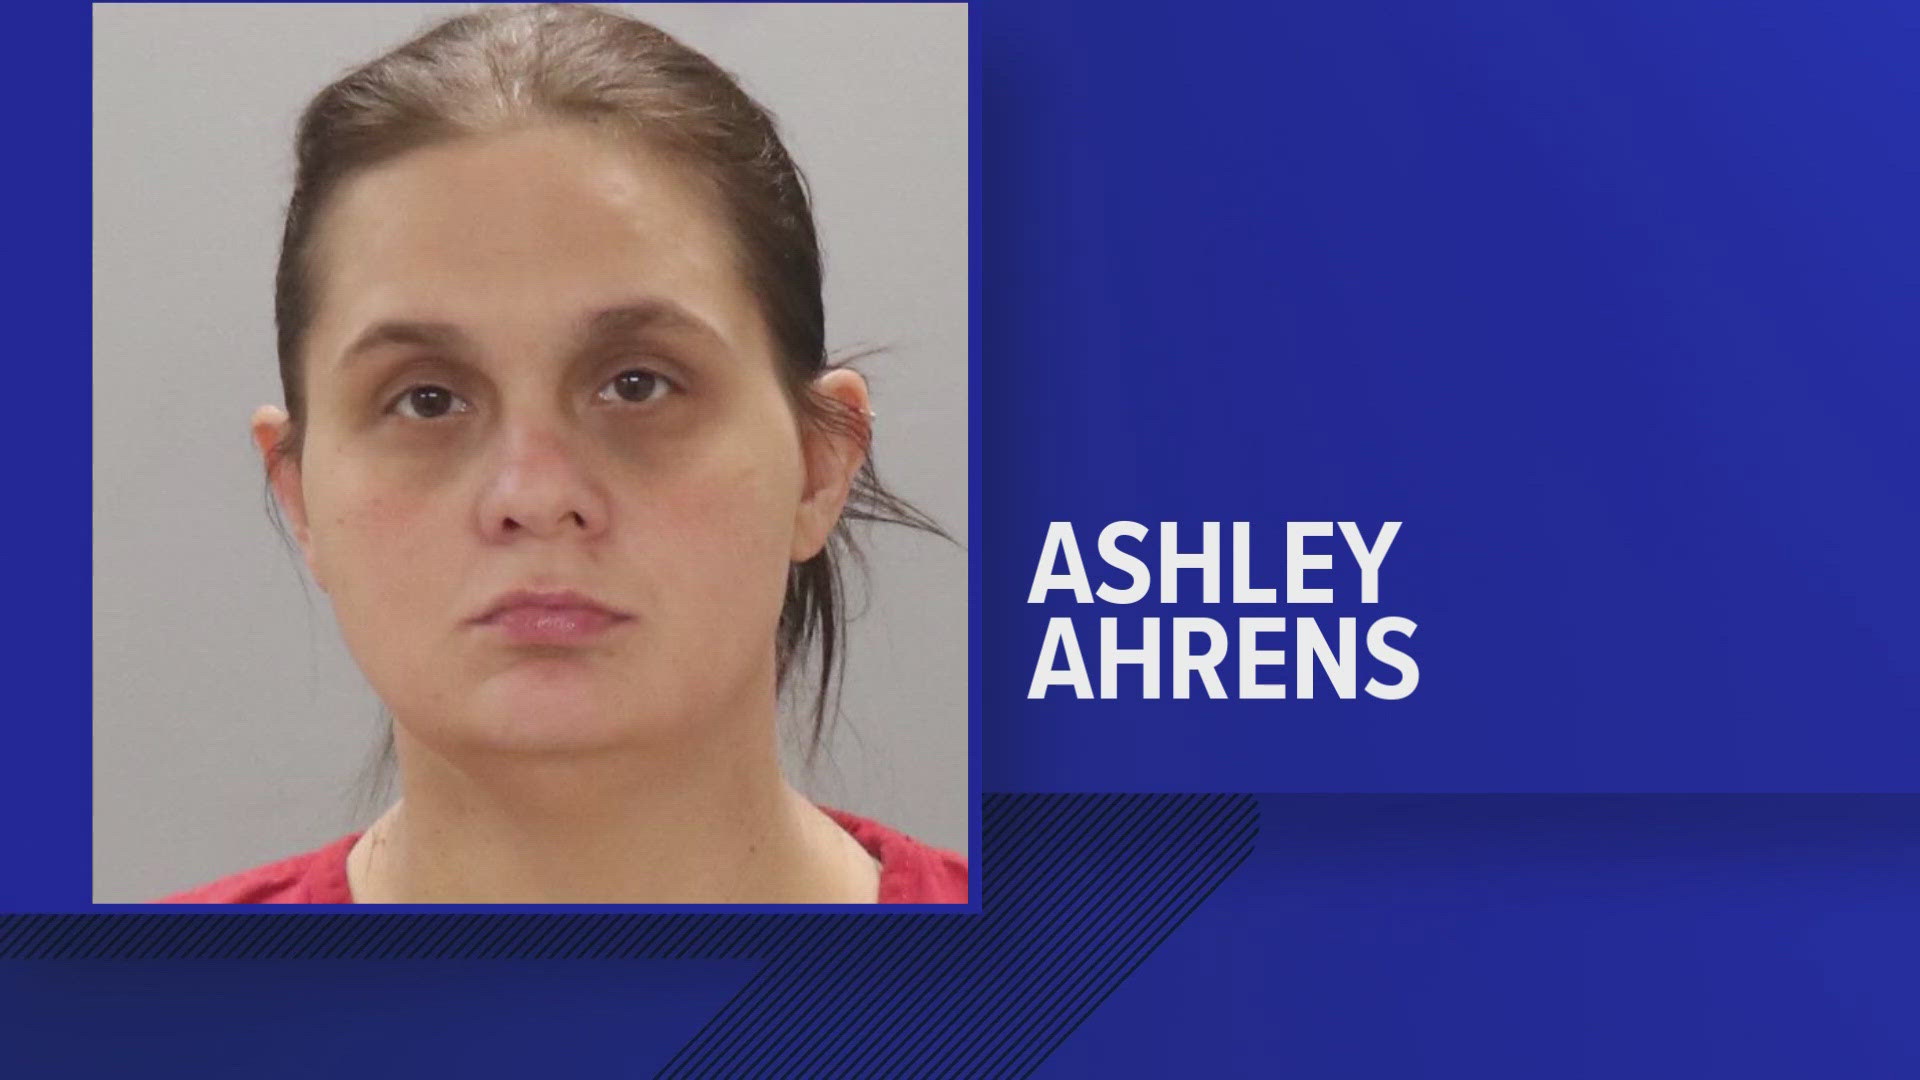 Charges against Ashley Ahrens were returned this month. Her husband was shot and killed in early February in Hamilton County.